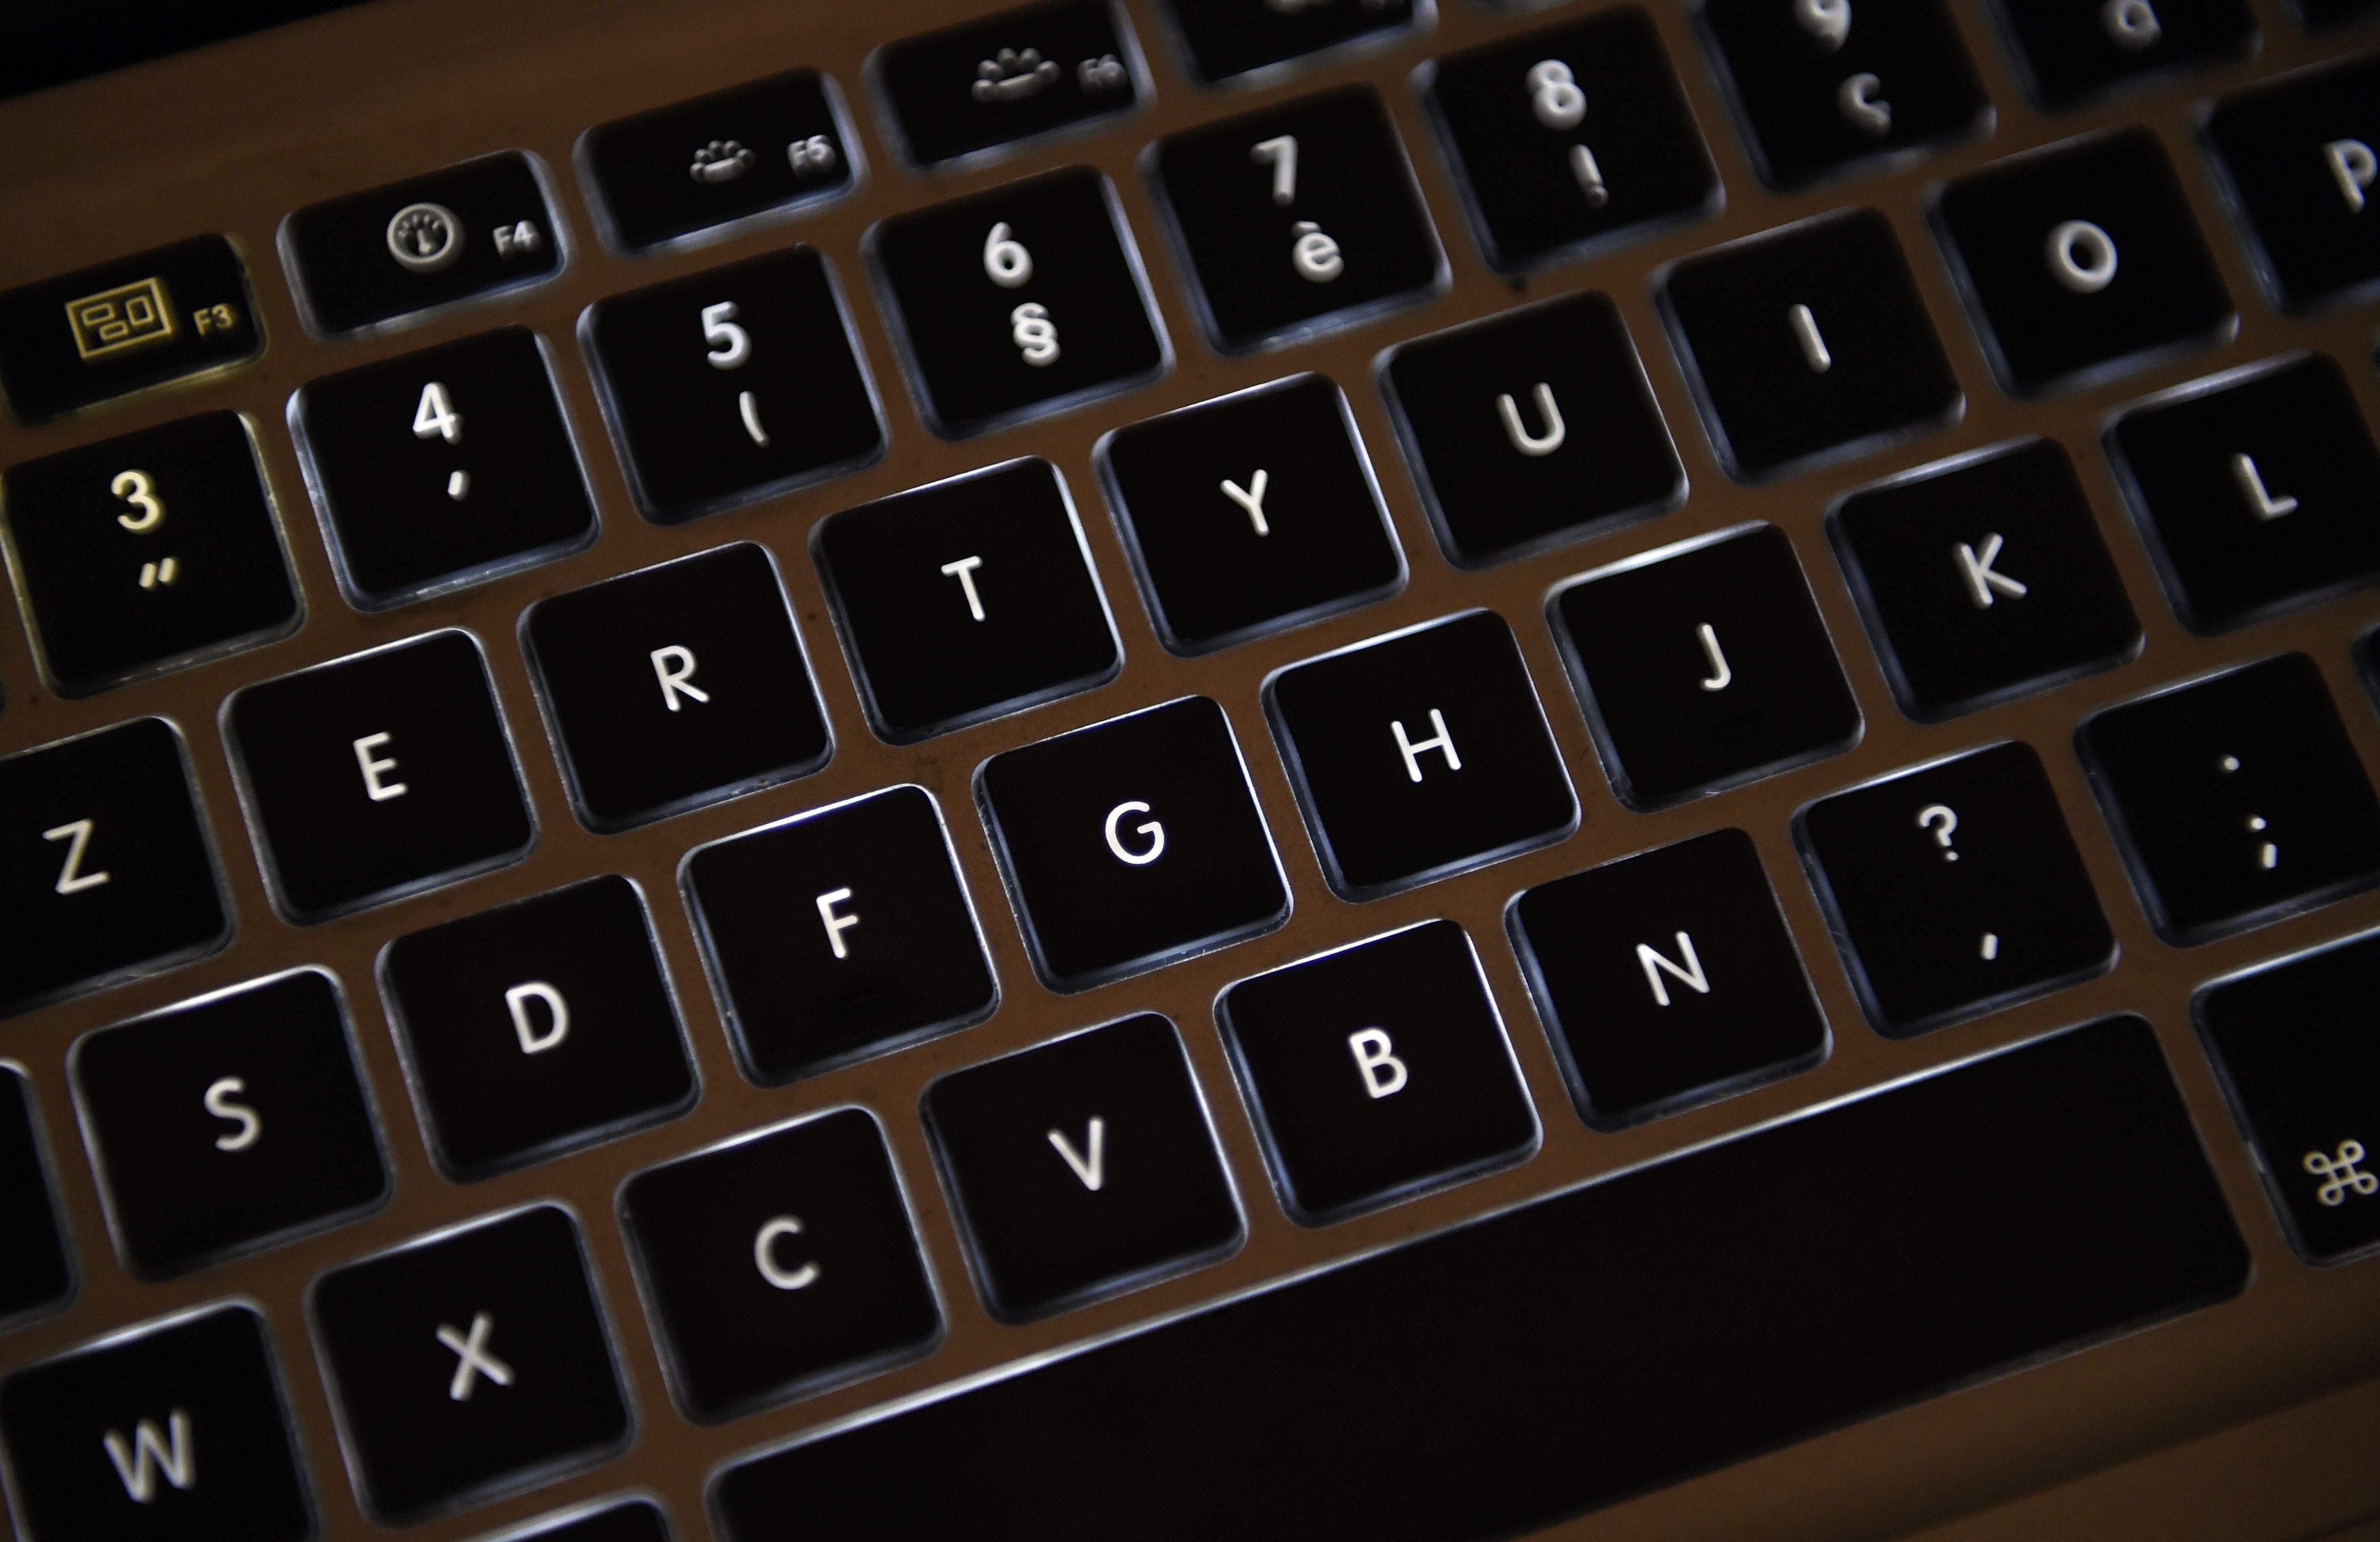 It's Shockingly Easy to Hack Some Wireless Keyboards